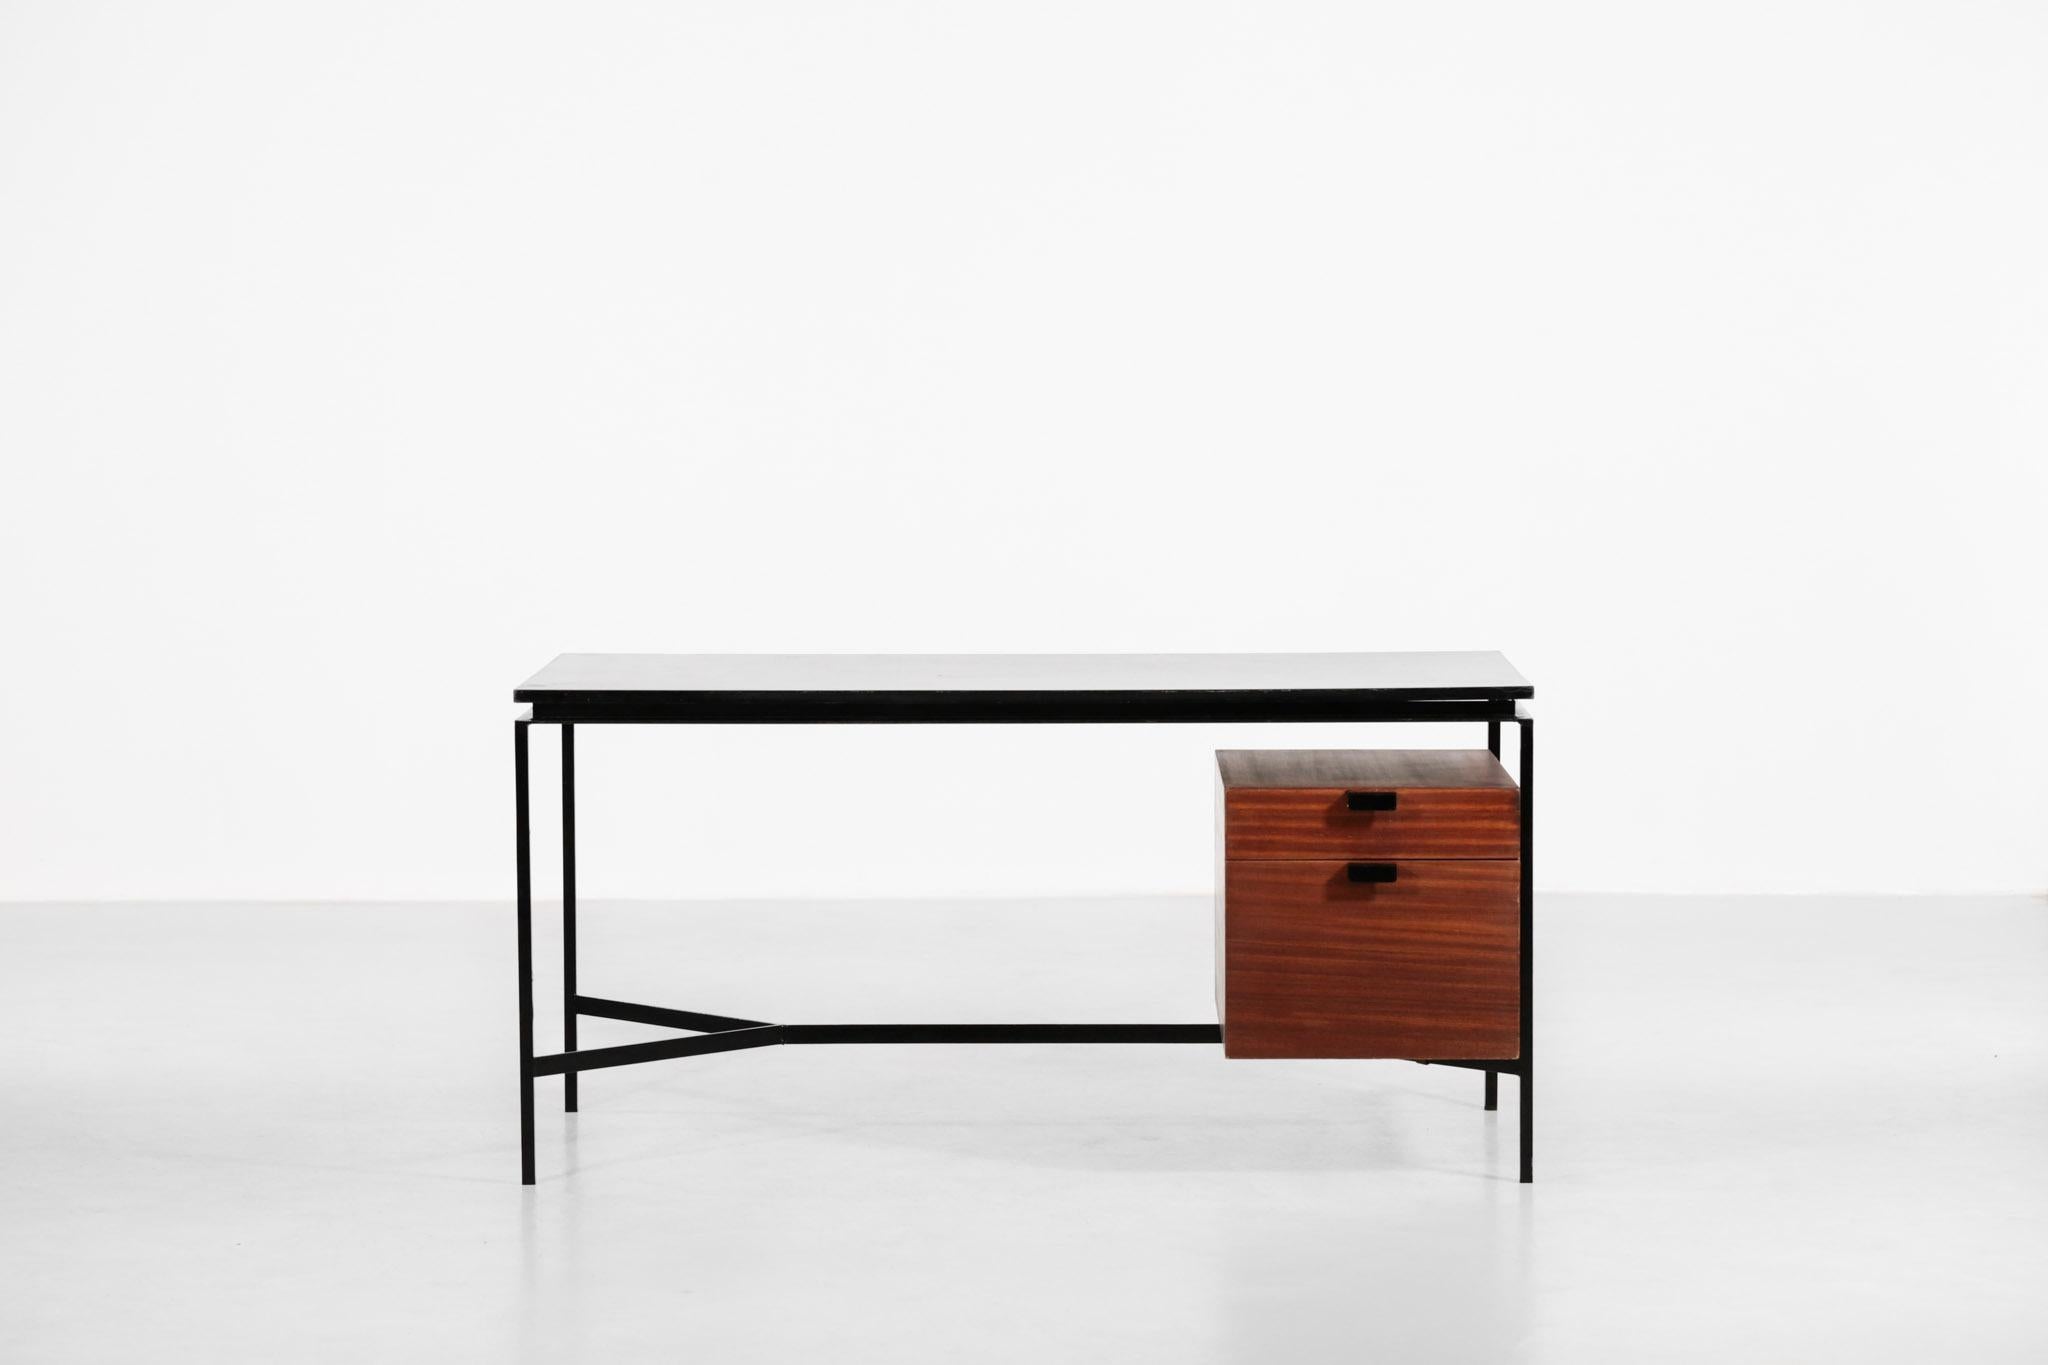 Iconic CM172 desk designed by Pierre Paulin for Thonet, France.
Black lacquered metal base. Mahogany veneer for the case.
Black Formica top with some scratches.